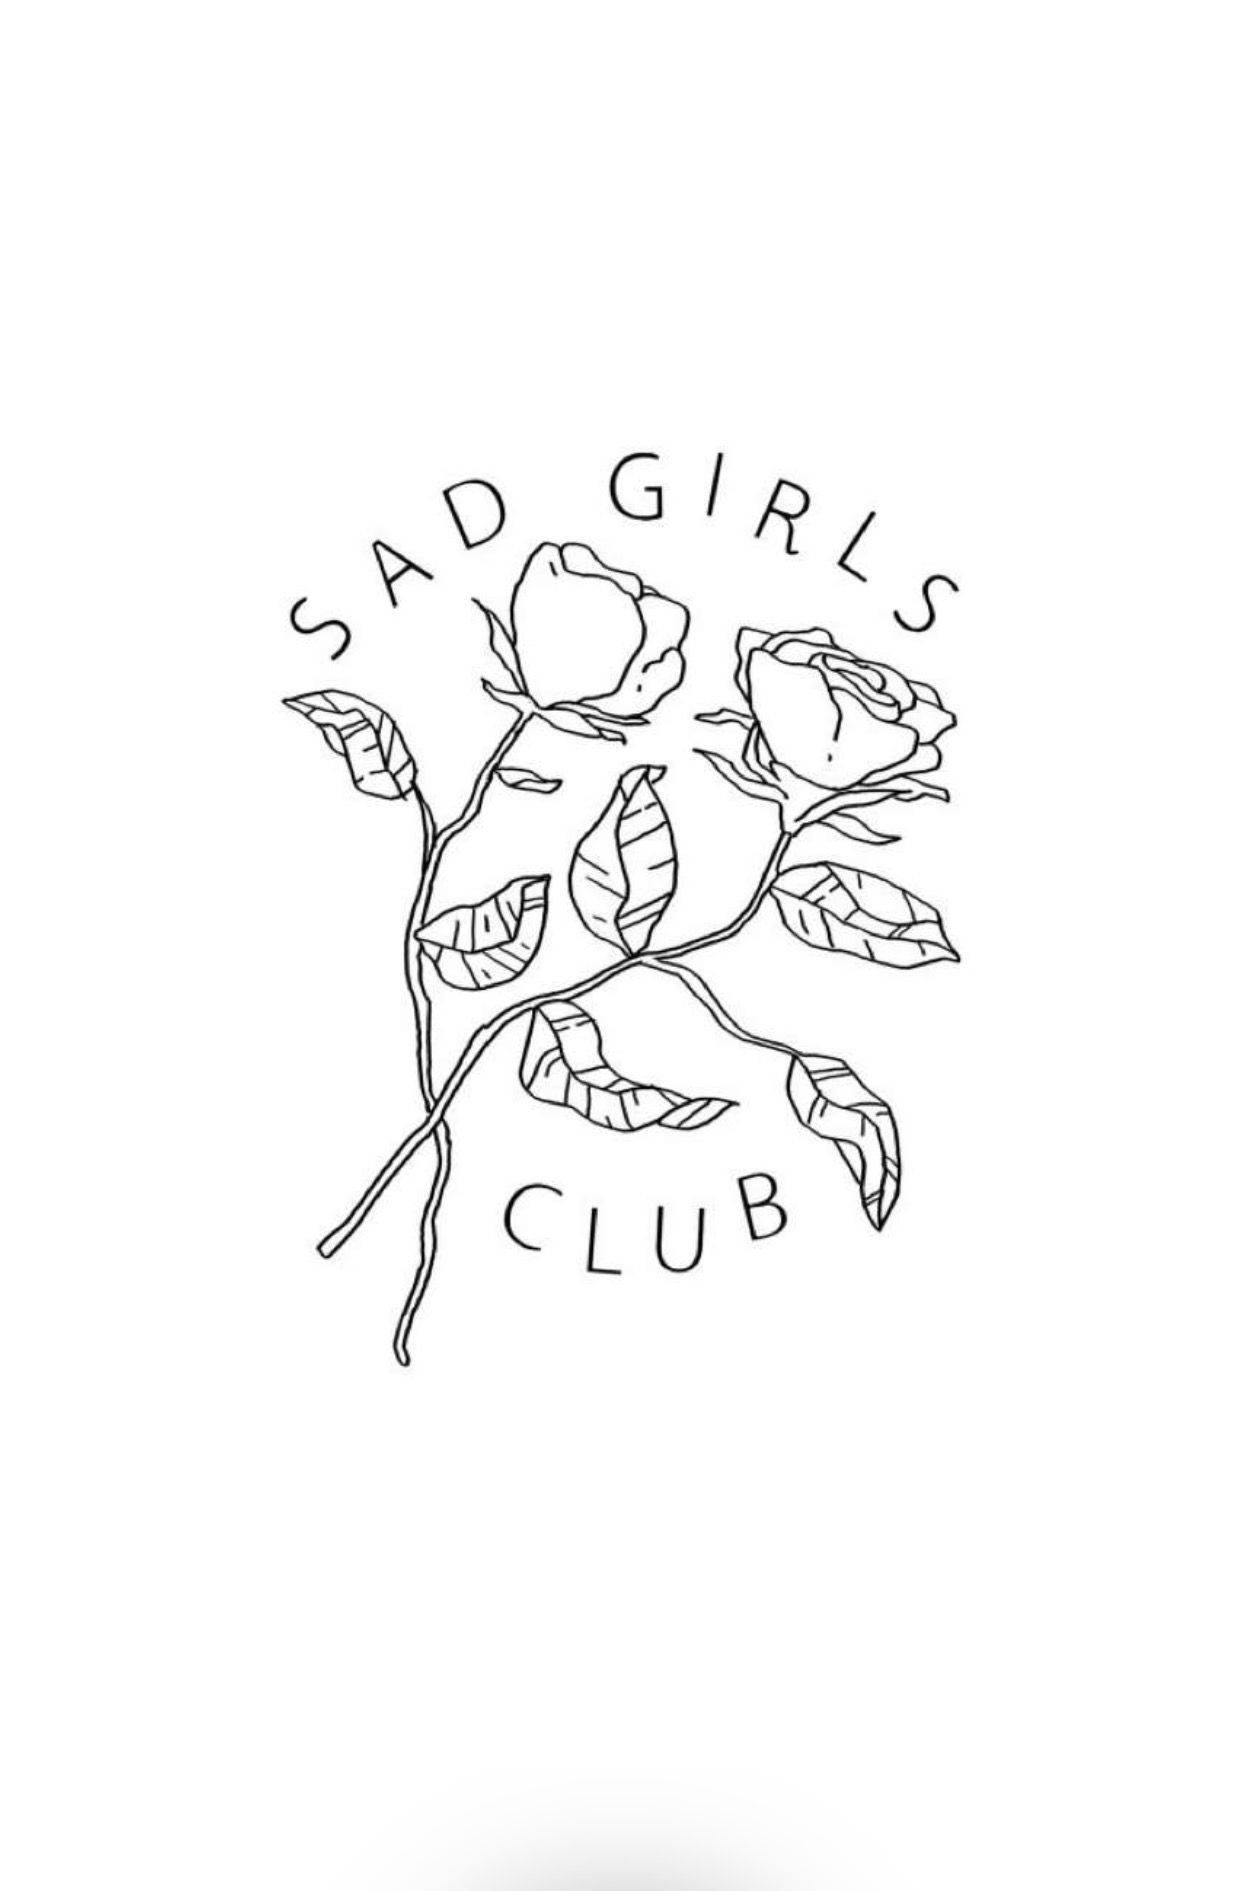 Sad Girls Club With Roses Indie Phone Background